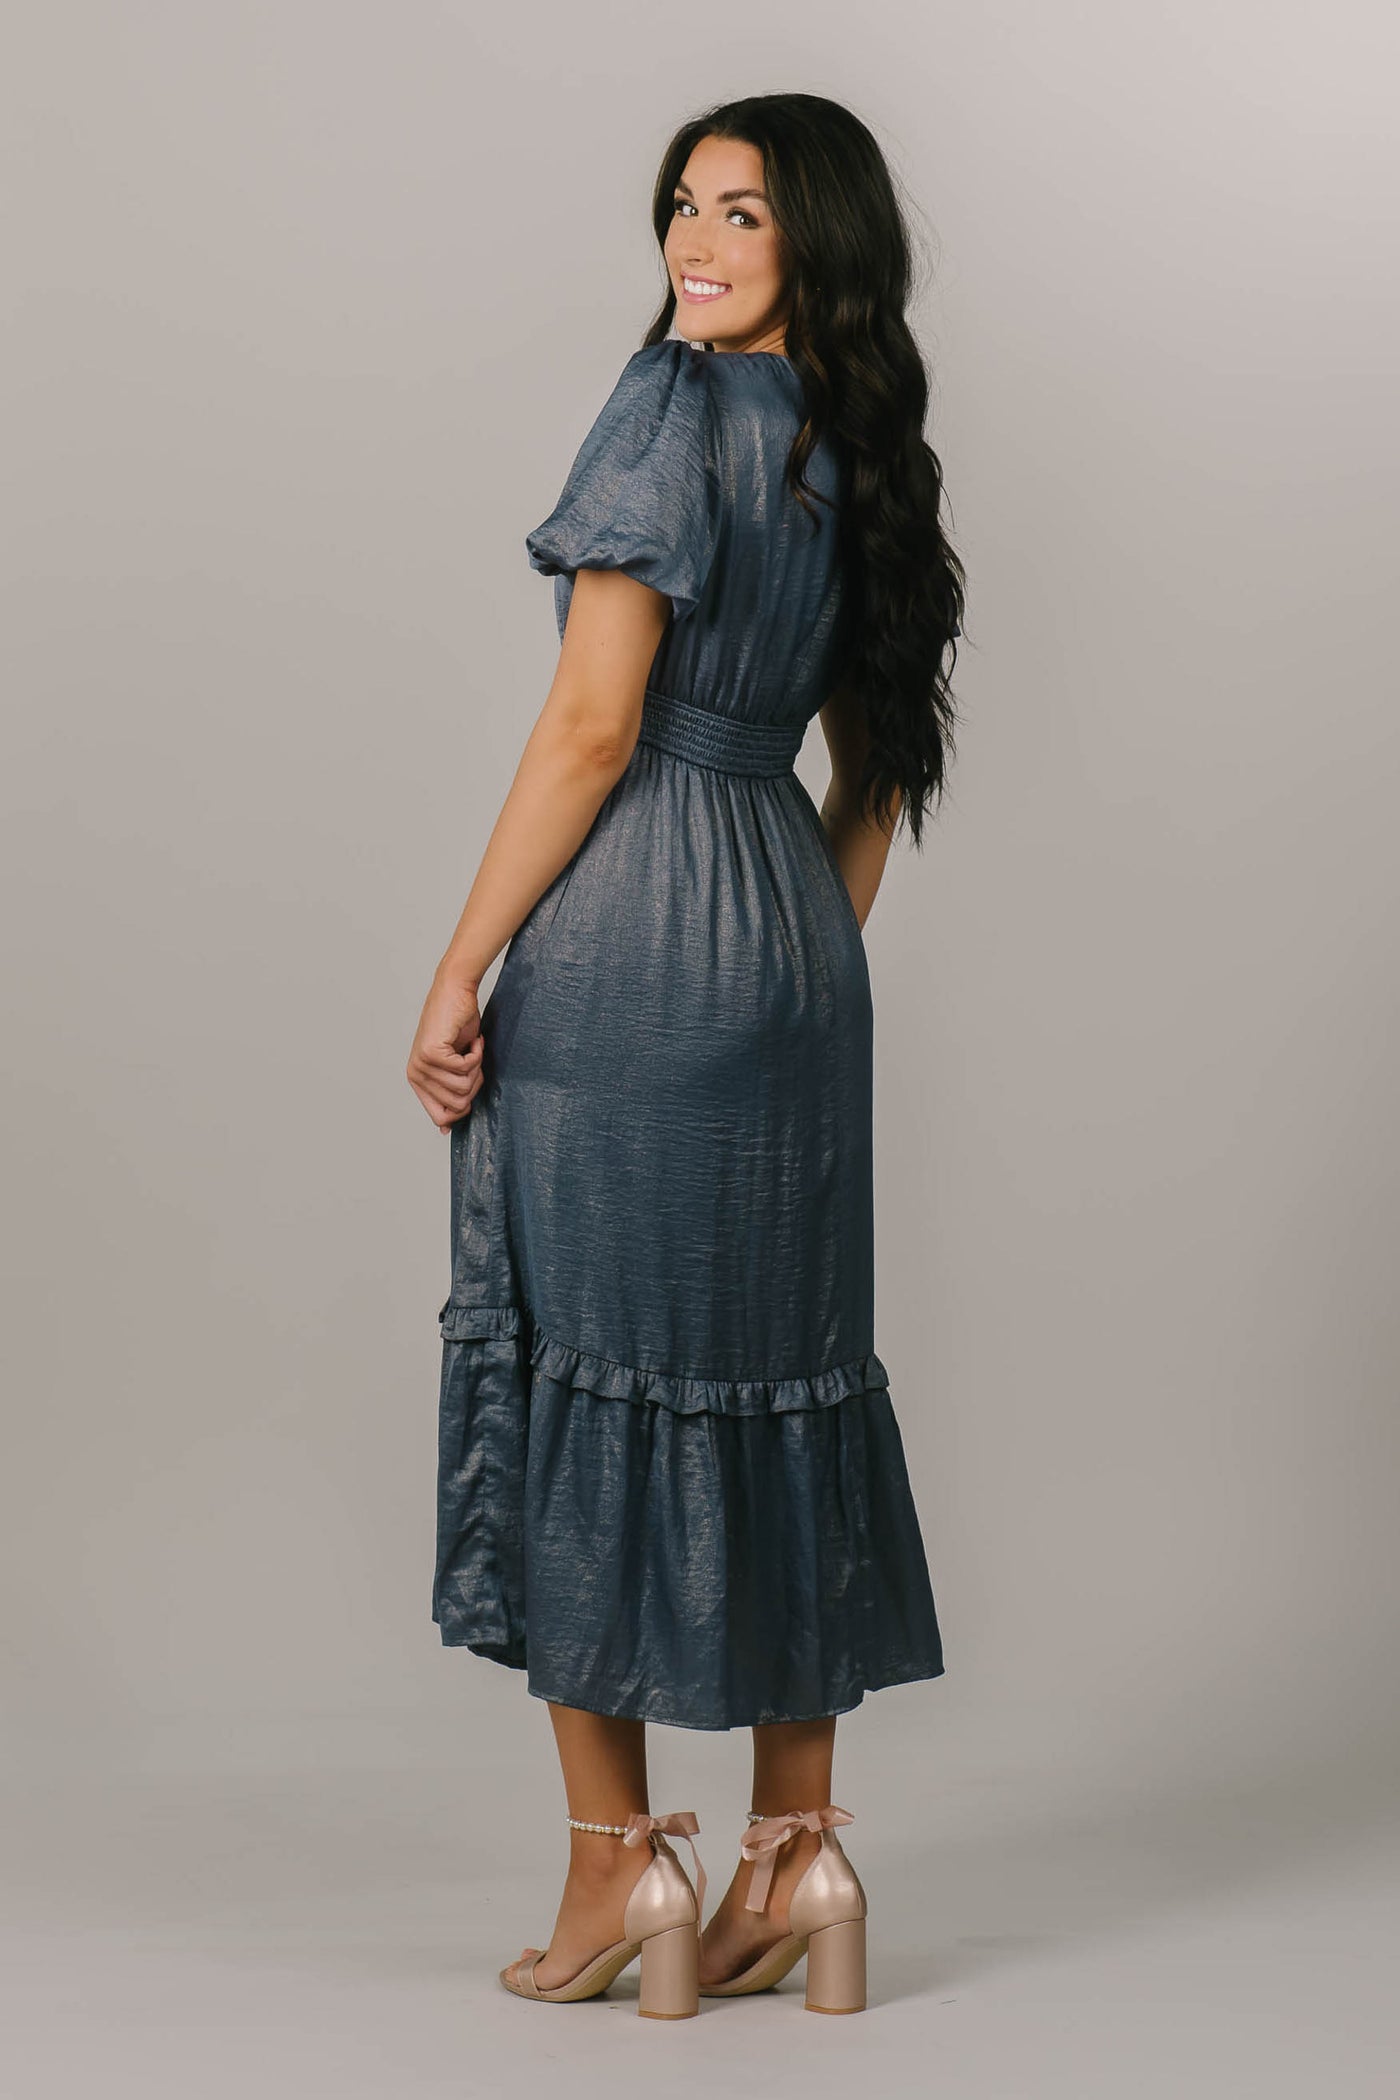 This a brunette model wearing a modest dress with shimmery blue fabric and a shot puff sleeve.